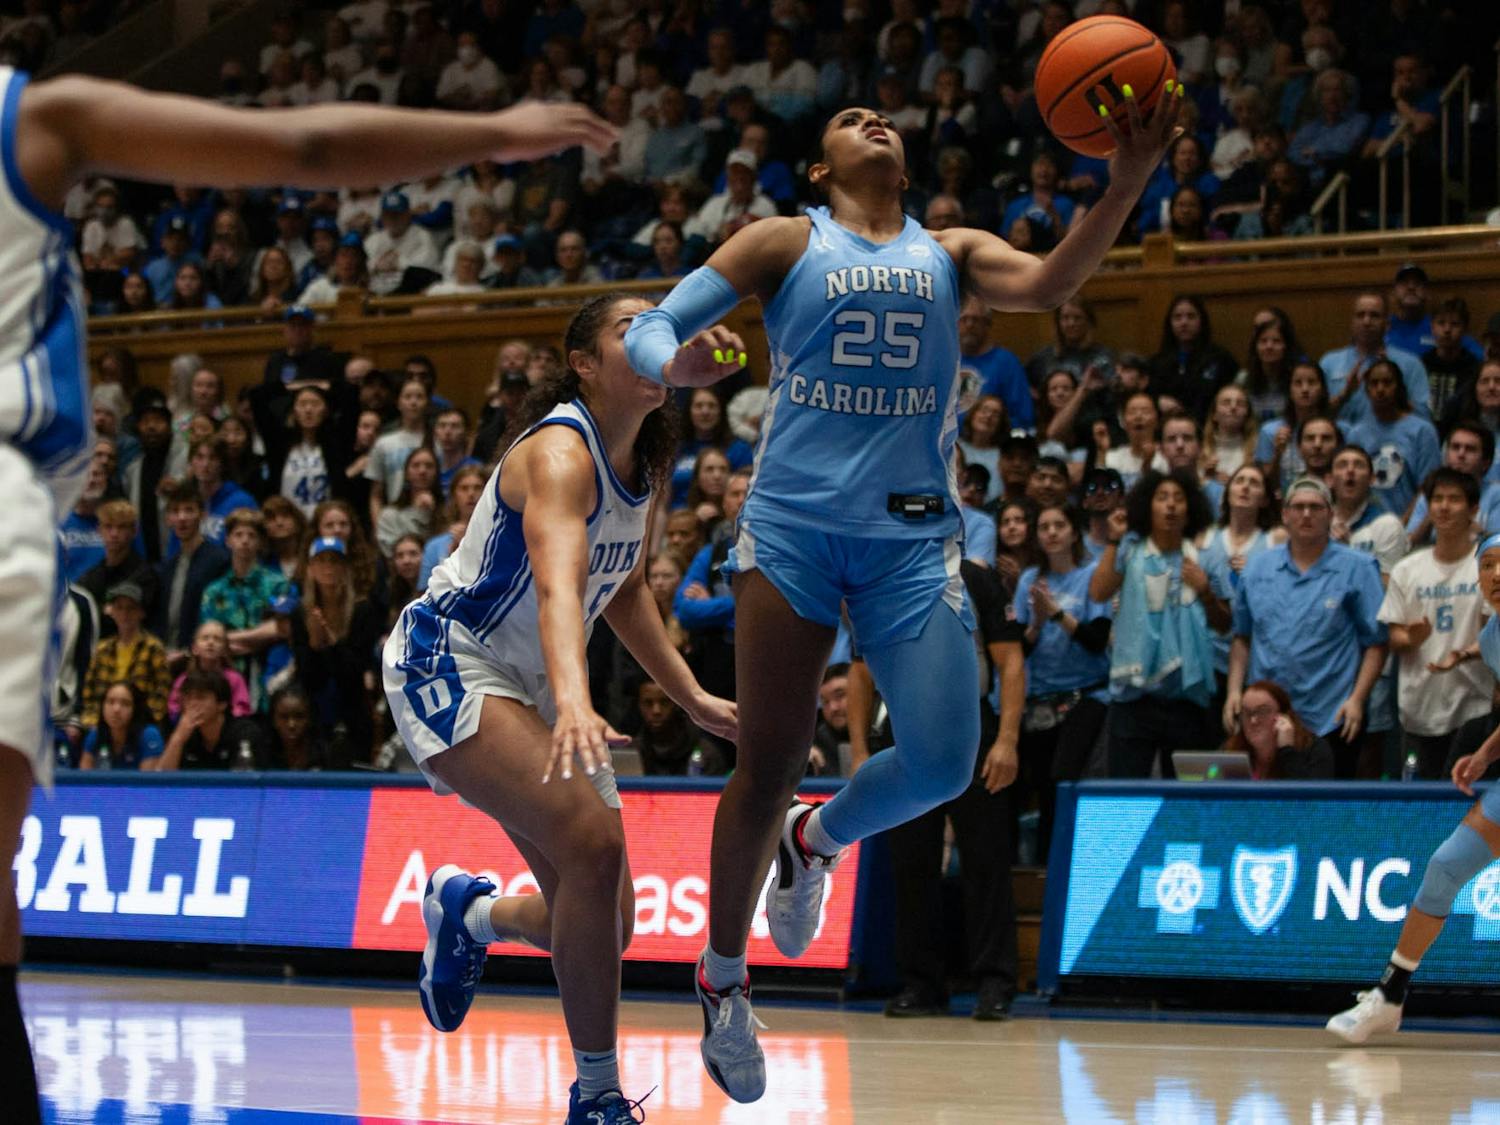 UNC junior guard Deja Kelly (25) shoots a layup during the women’s basketball game against Duke on Sunday, Feb. 26, 2023, at Cameron Indoor Stadium. UNC defeated Duke 45-41.